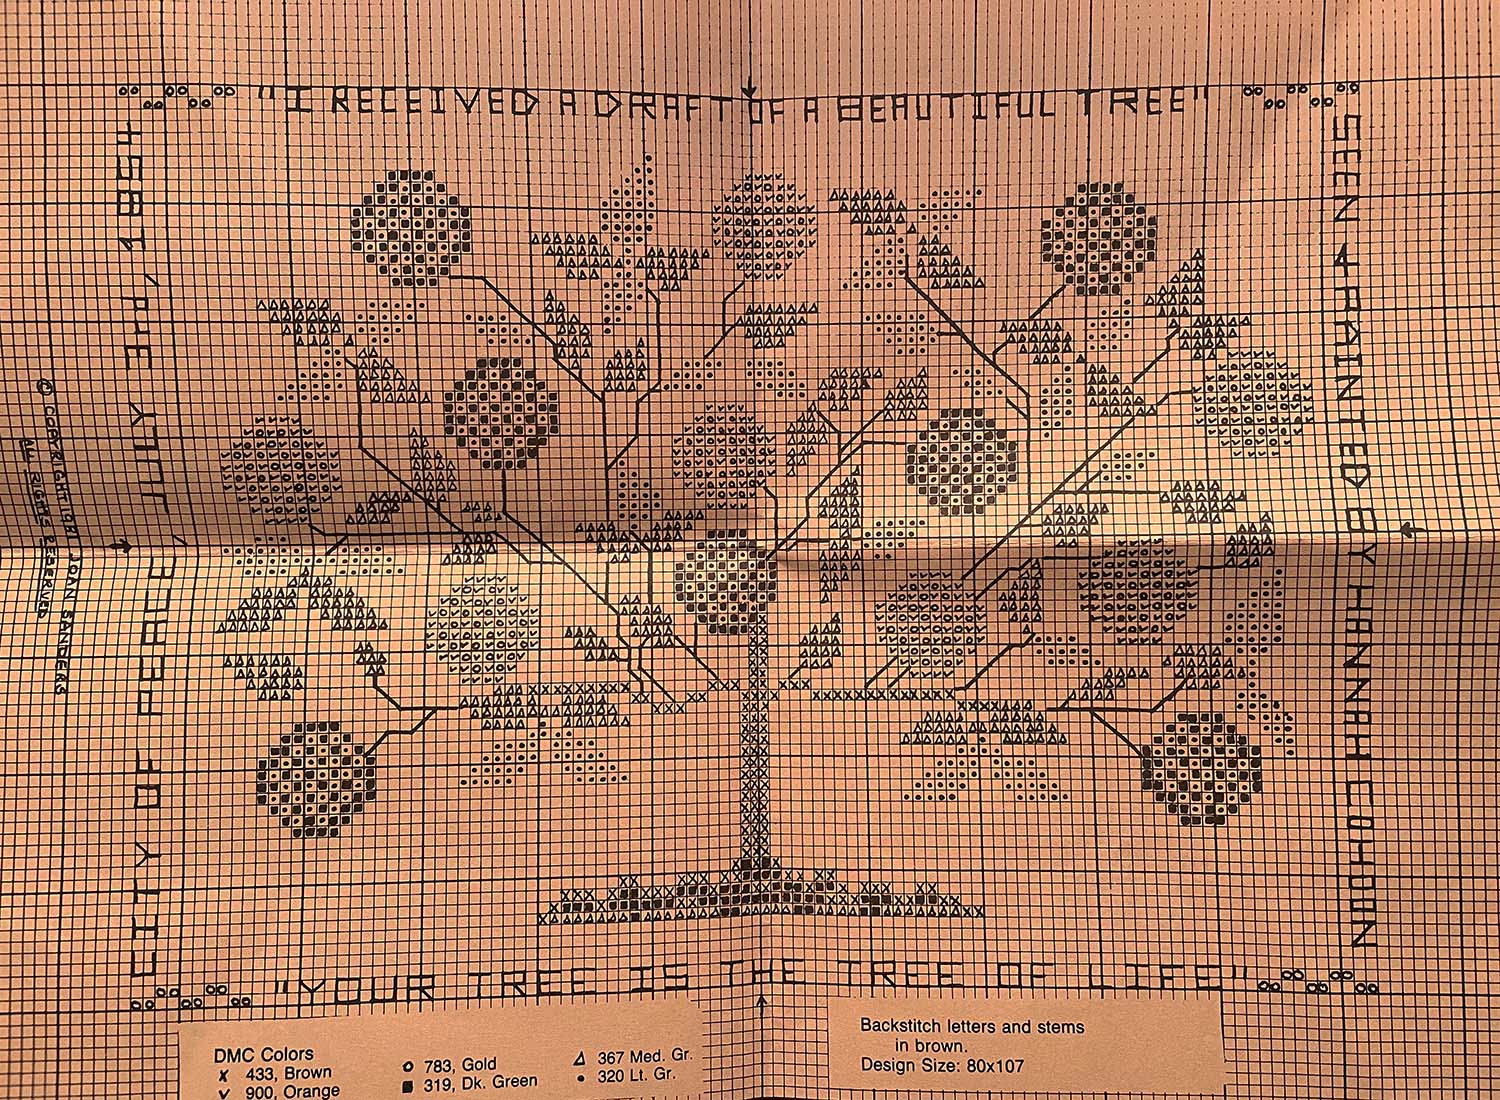 Cross stitch pattern for a tree of life. In the pattern, around the tree, starting from the top and moving clockwise, reads: I RECEIVED A DRAFT OF A BEAUTIFUL TREE / SEEN AND PAINTED BY HANNAH COHOON / YOUR TREE IS THE TREE OF LIFE / CITY OF PEACE, JULY 3, 1854